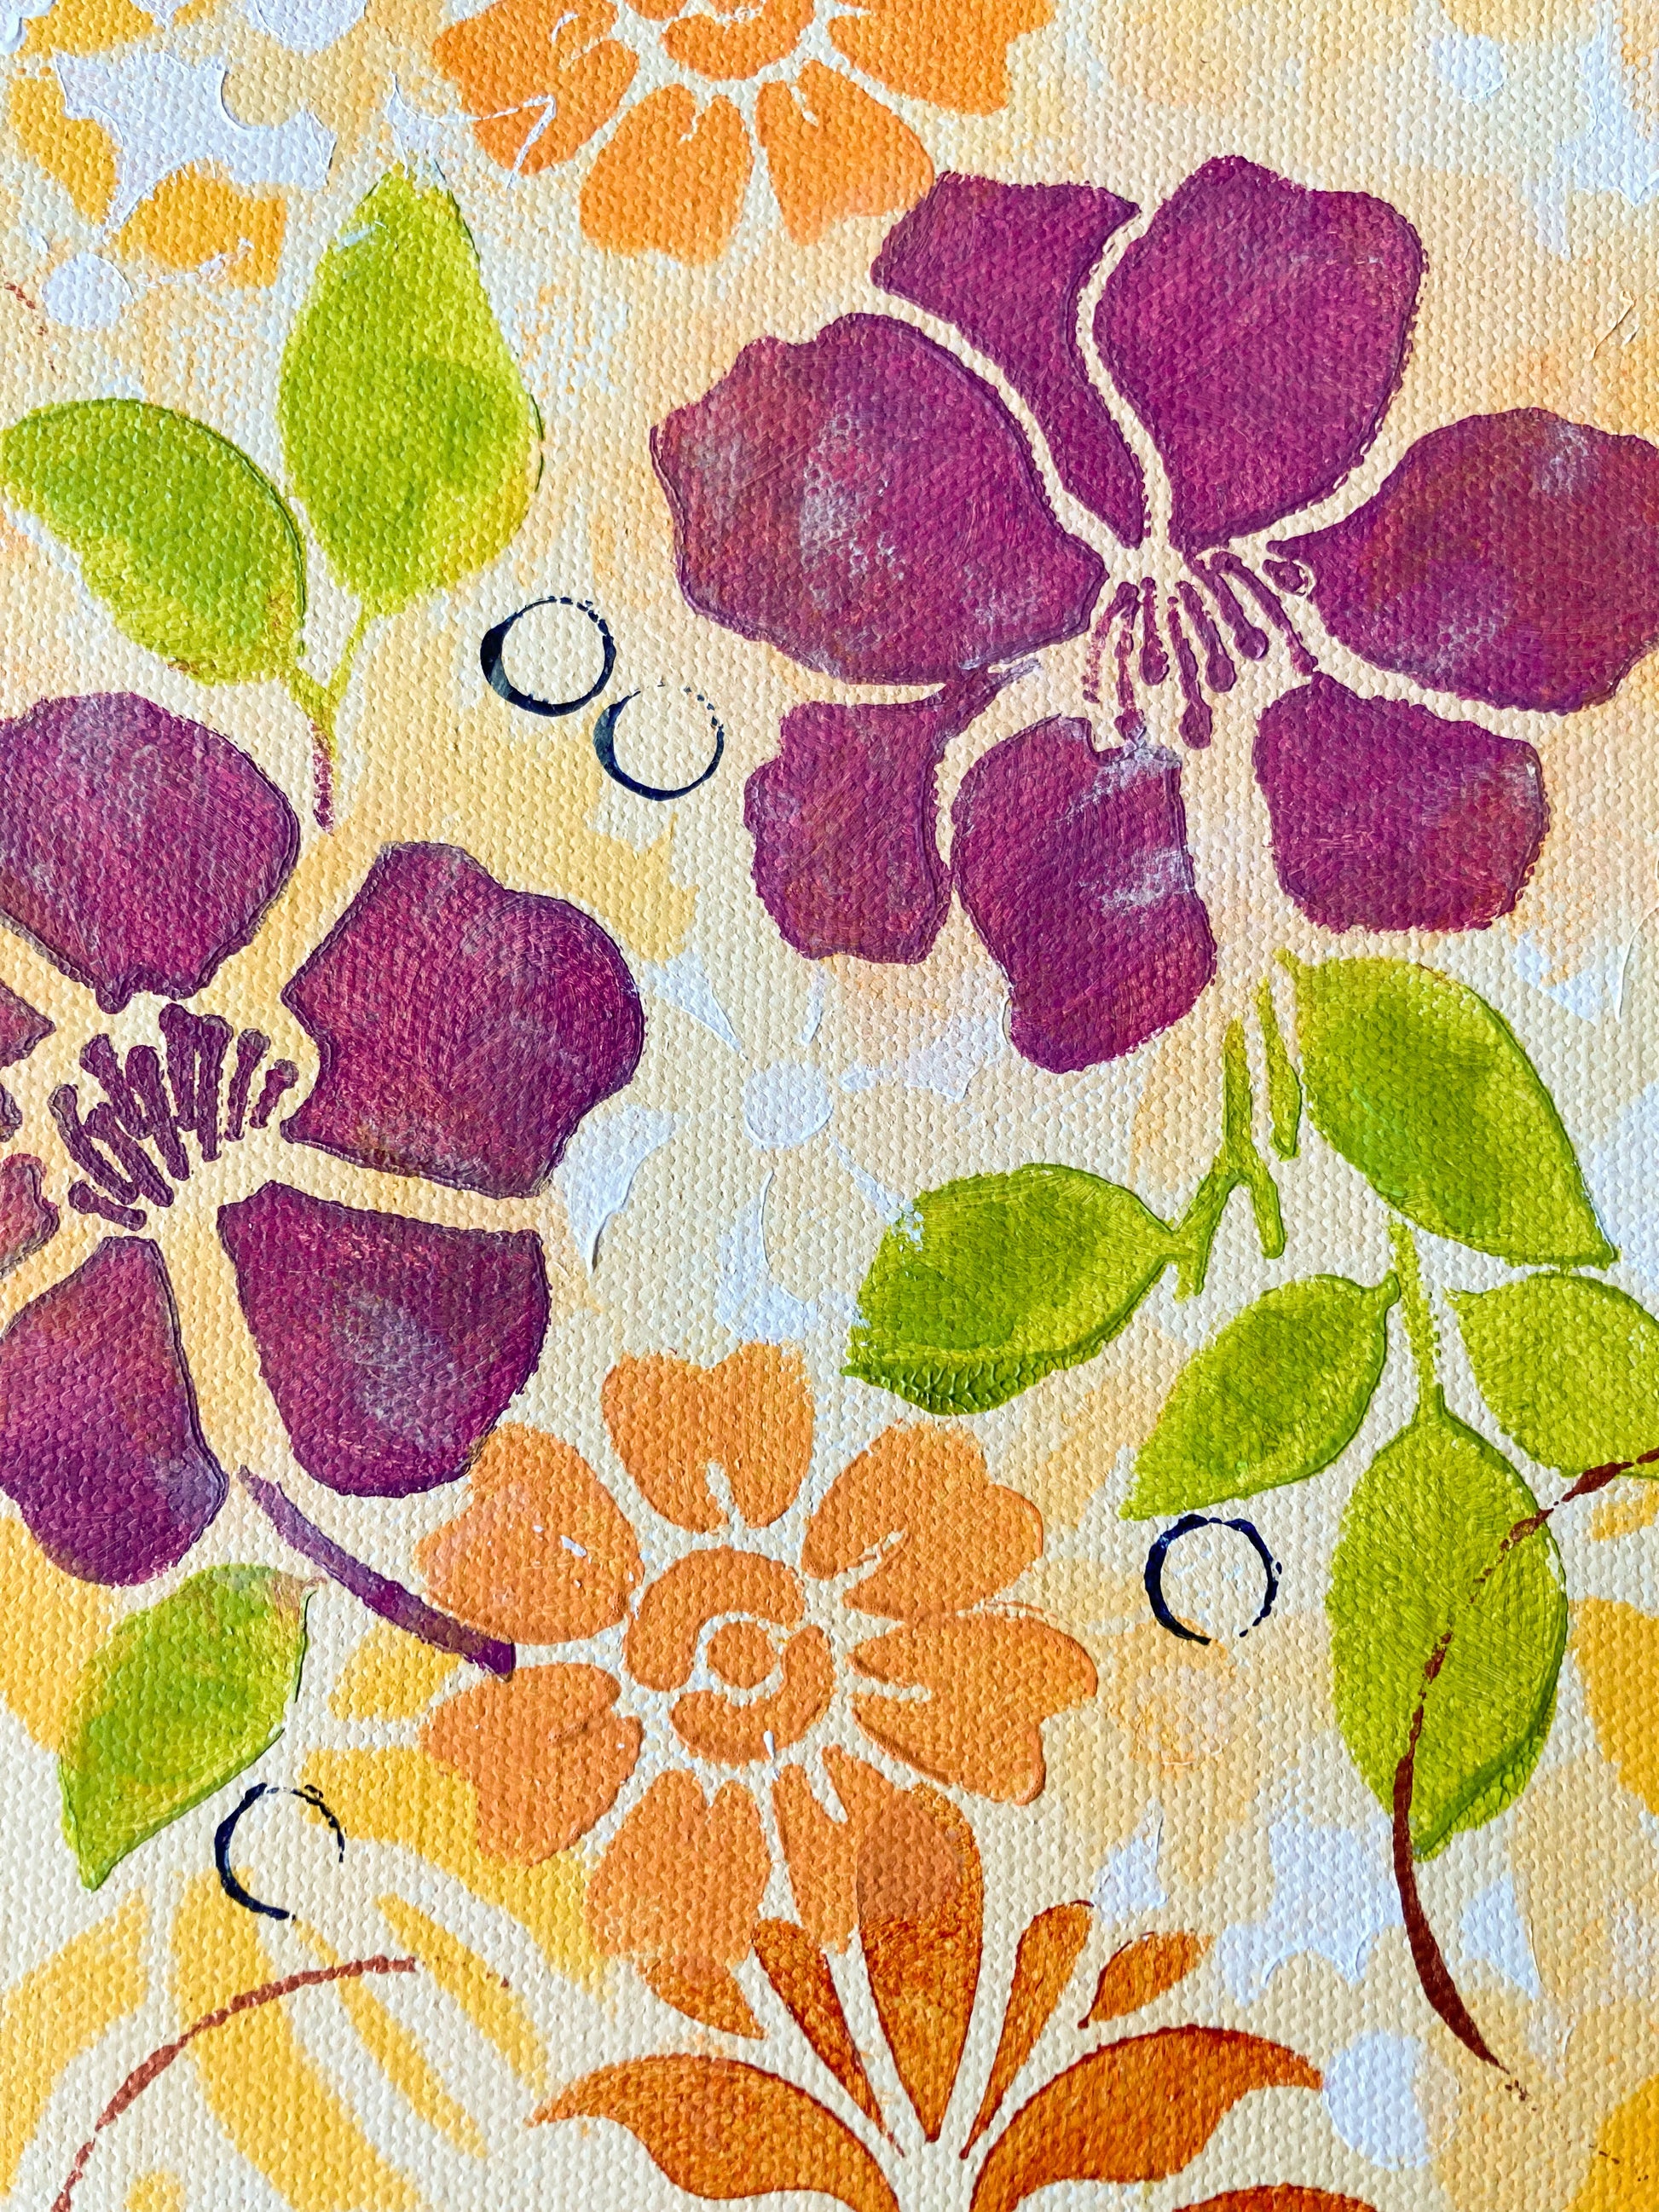 detail view floral Hawaiian theme acrylic painting on canvas dark pink flowers orange flowers green leaves circles and scrolling shapes warm and cheerful